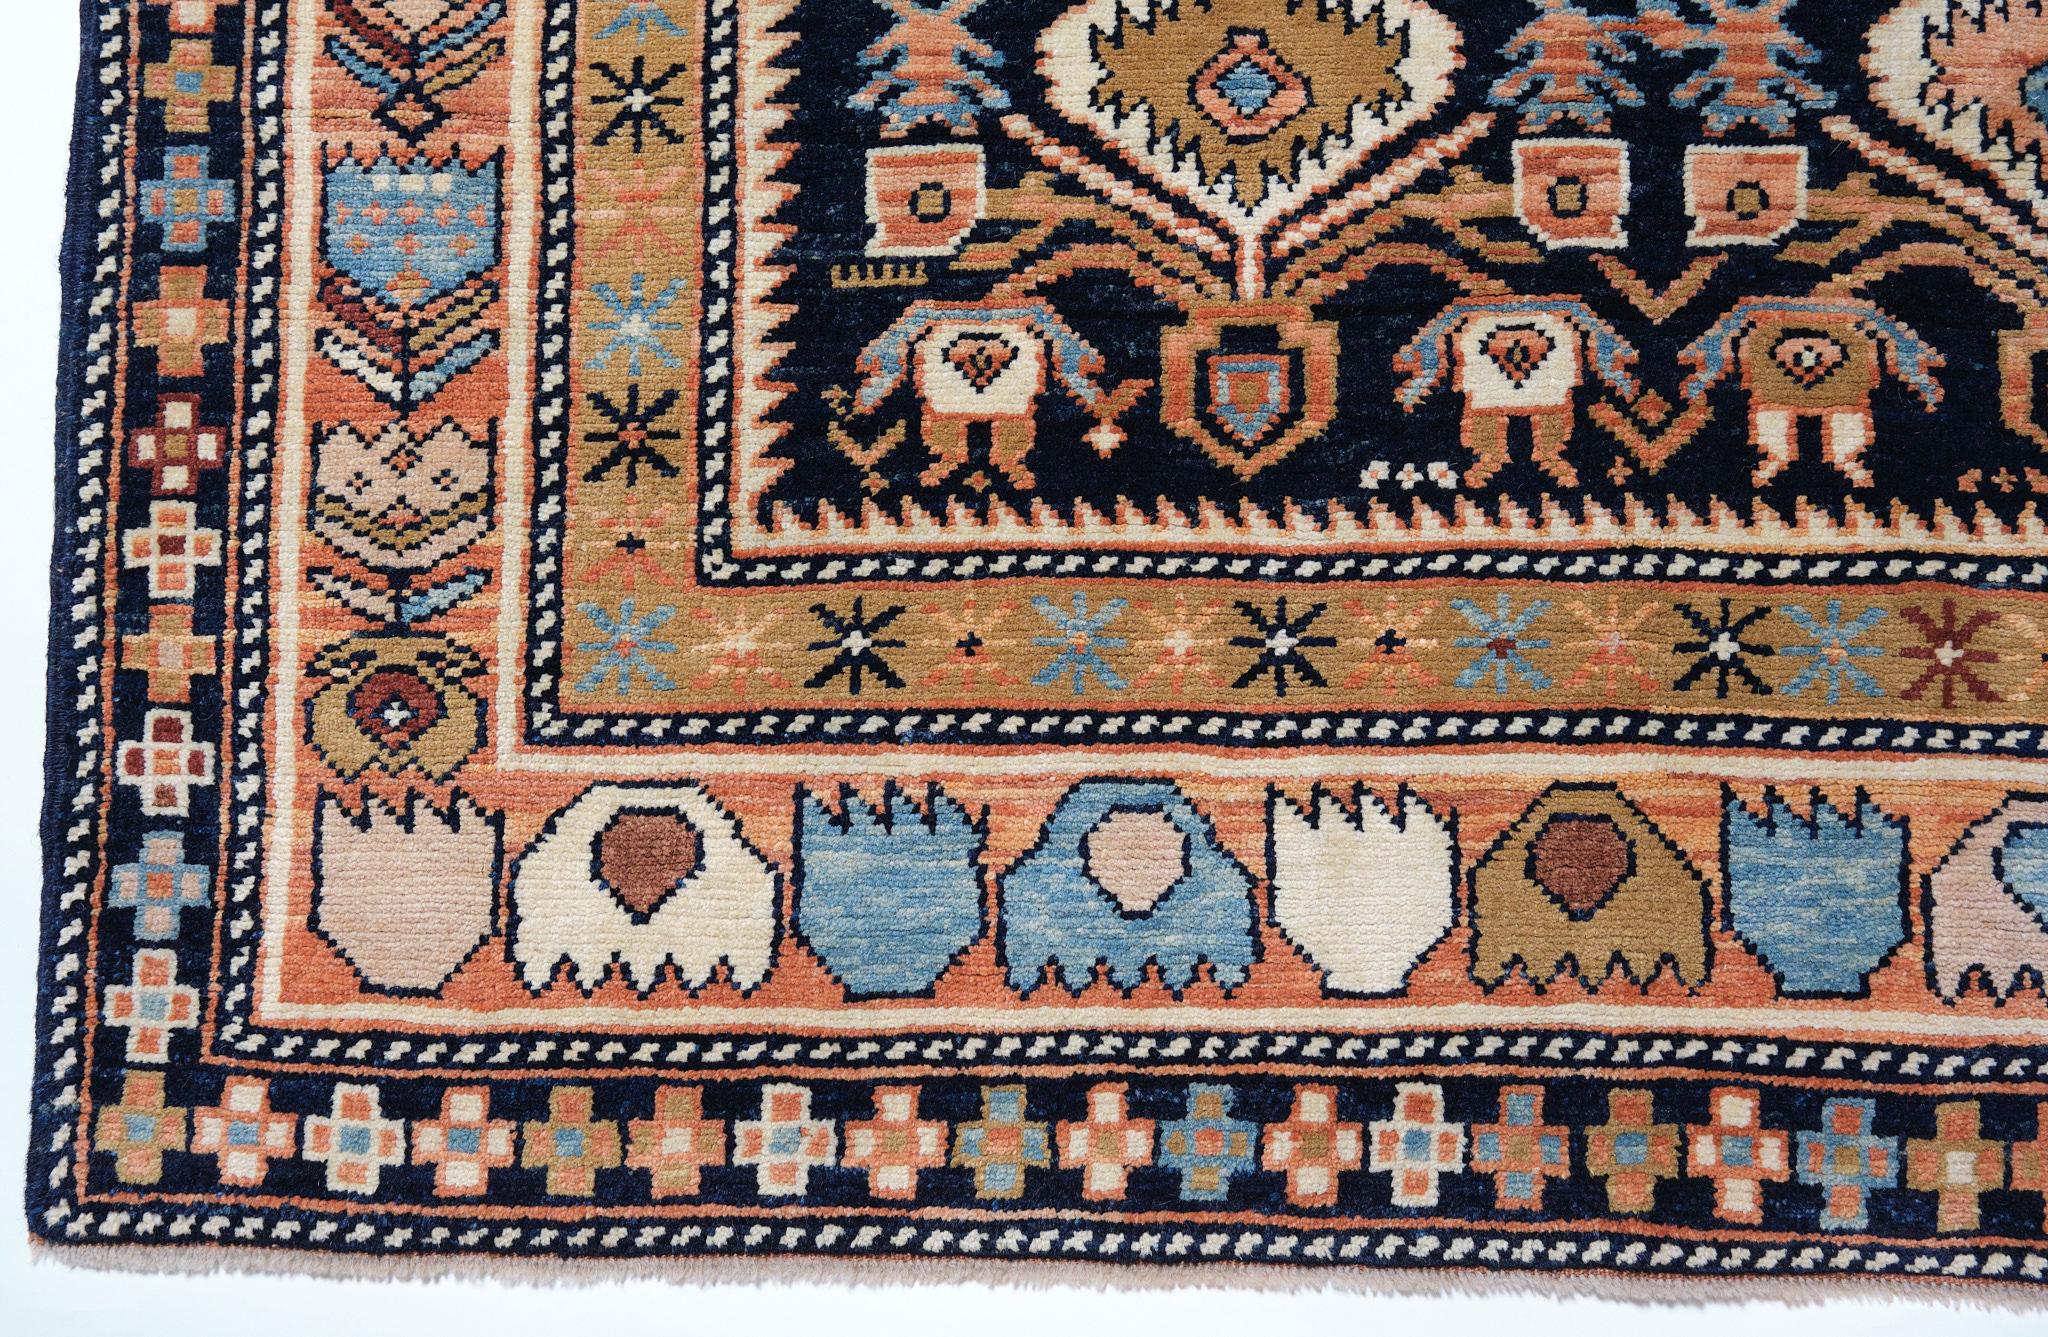 This is an unusual stylized version of the Caucasian shield-like palmettes design rug from the late 19th century, Shirvan region, Caucasus area. Shirvan is one of the principal weaving areas of the Caucasus, stretching from the central east coast